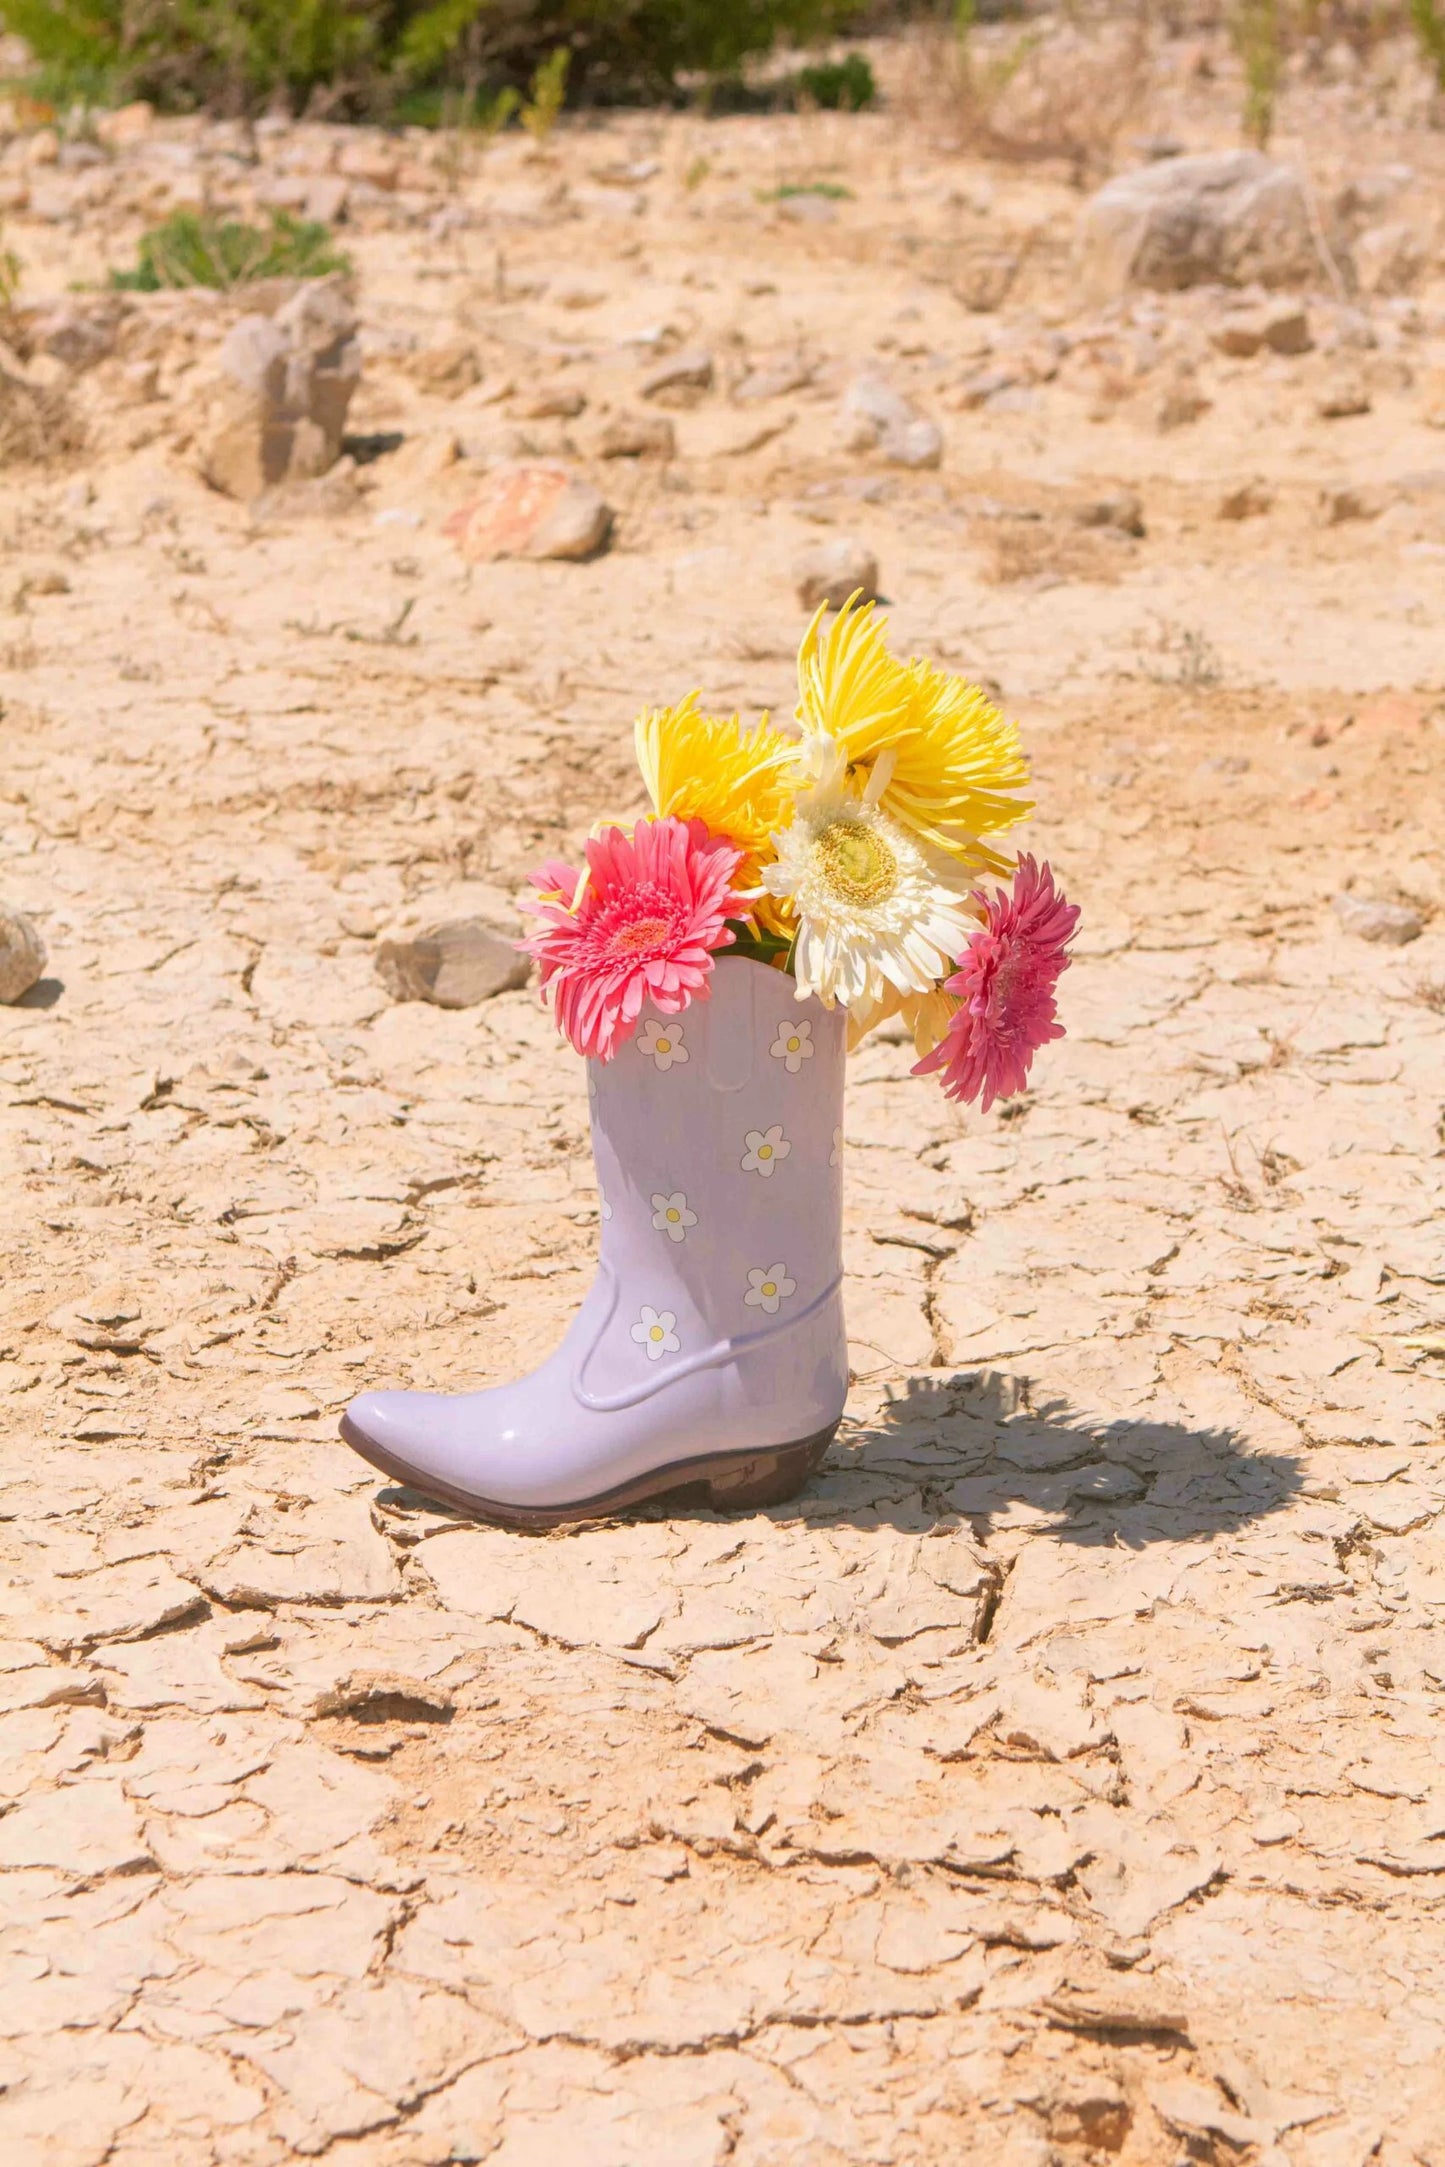 Vase rodeo cowboy boot - lilac | Doiydesign